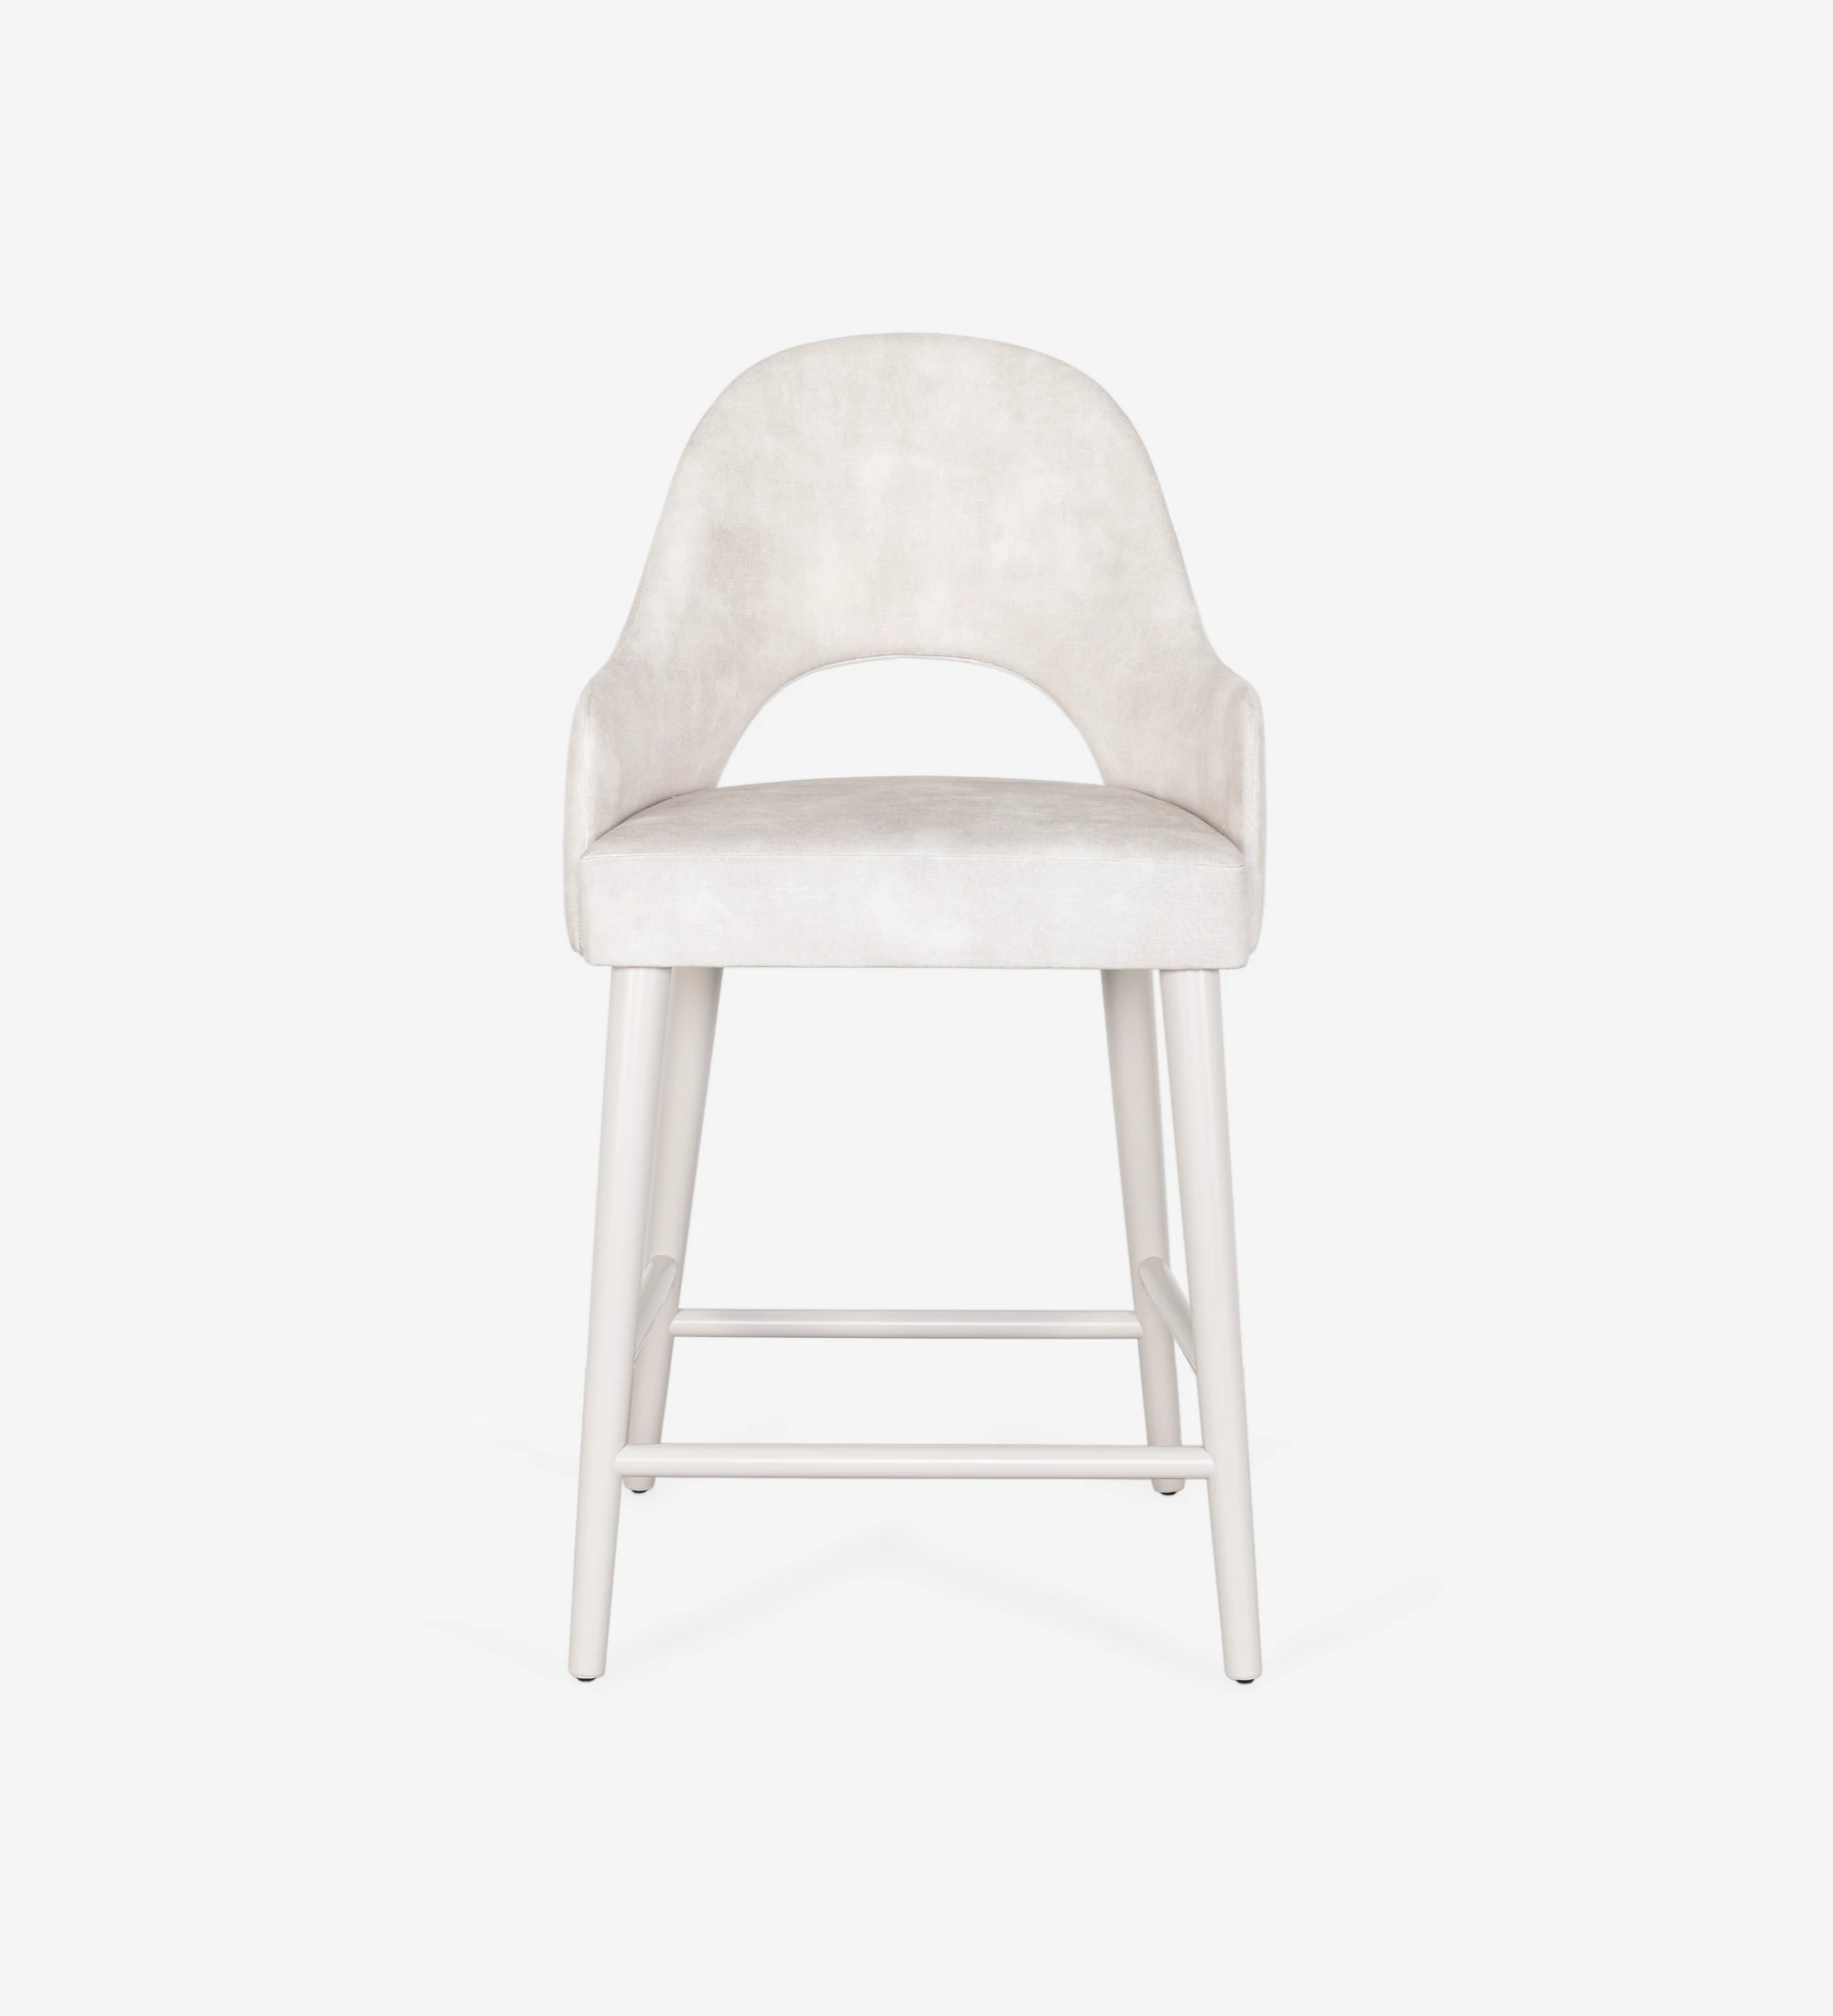 Paris high stool with arms upholstered in pearl fabric, pearl lacquered feet.